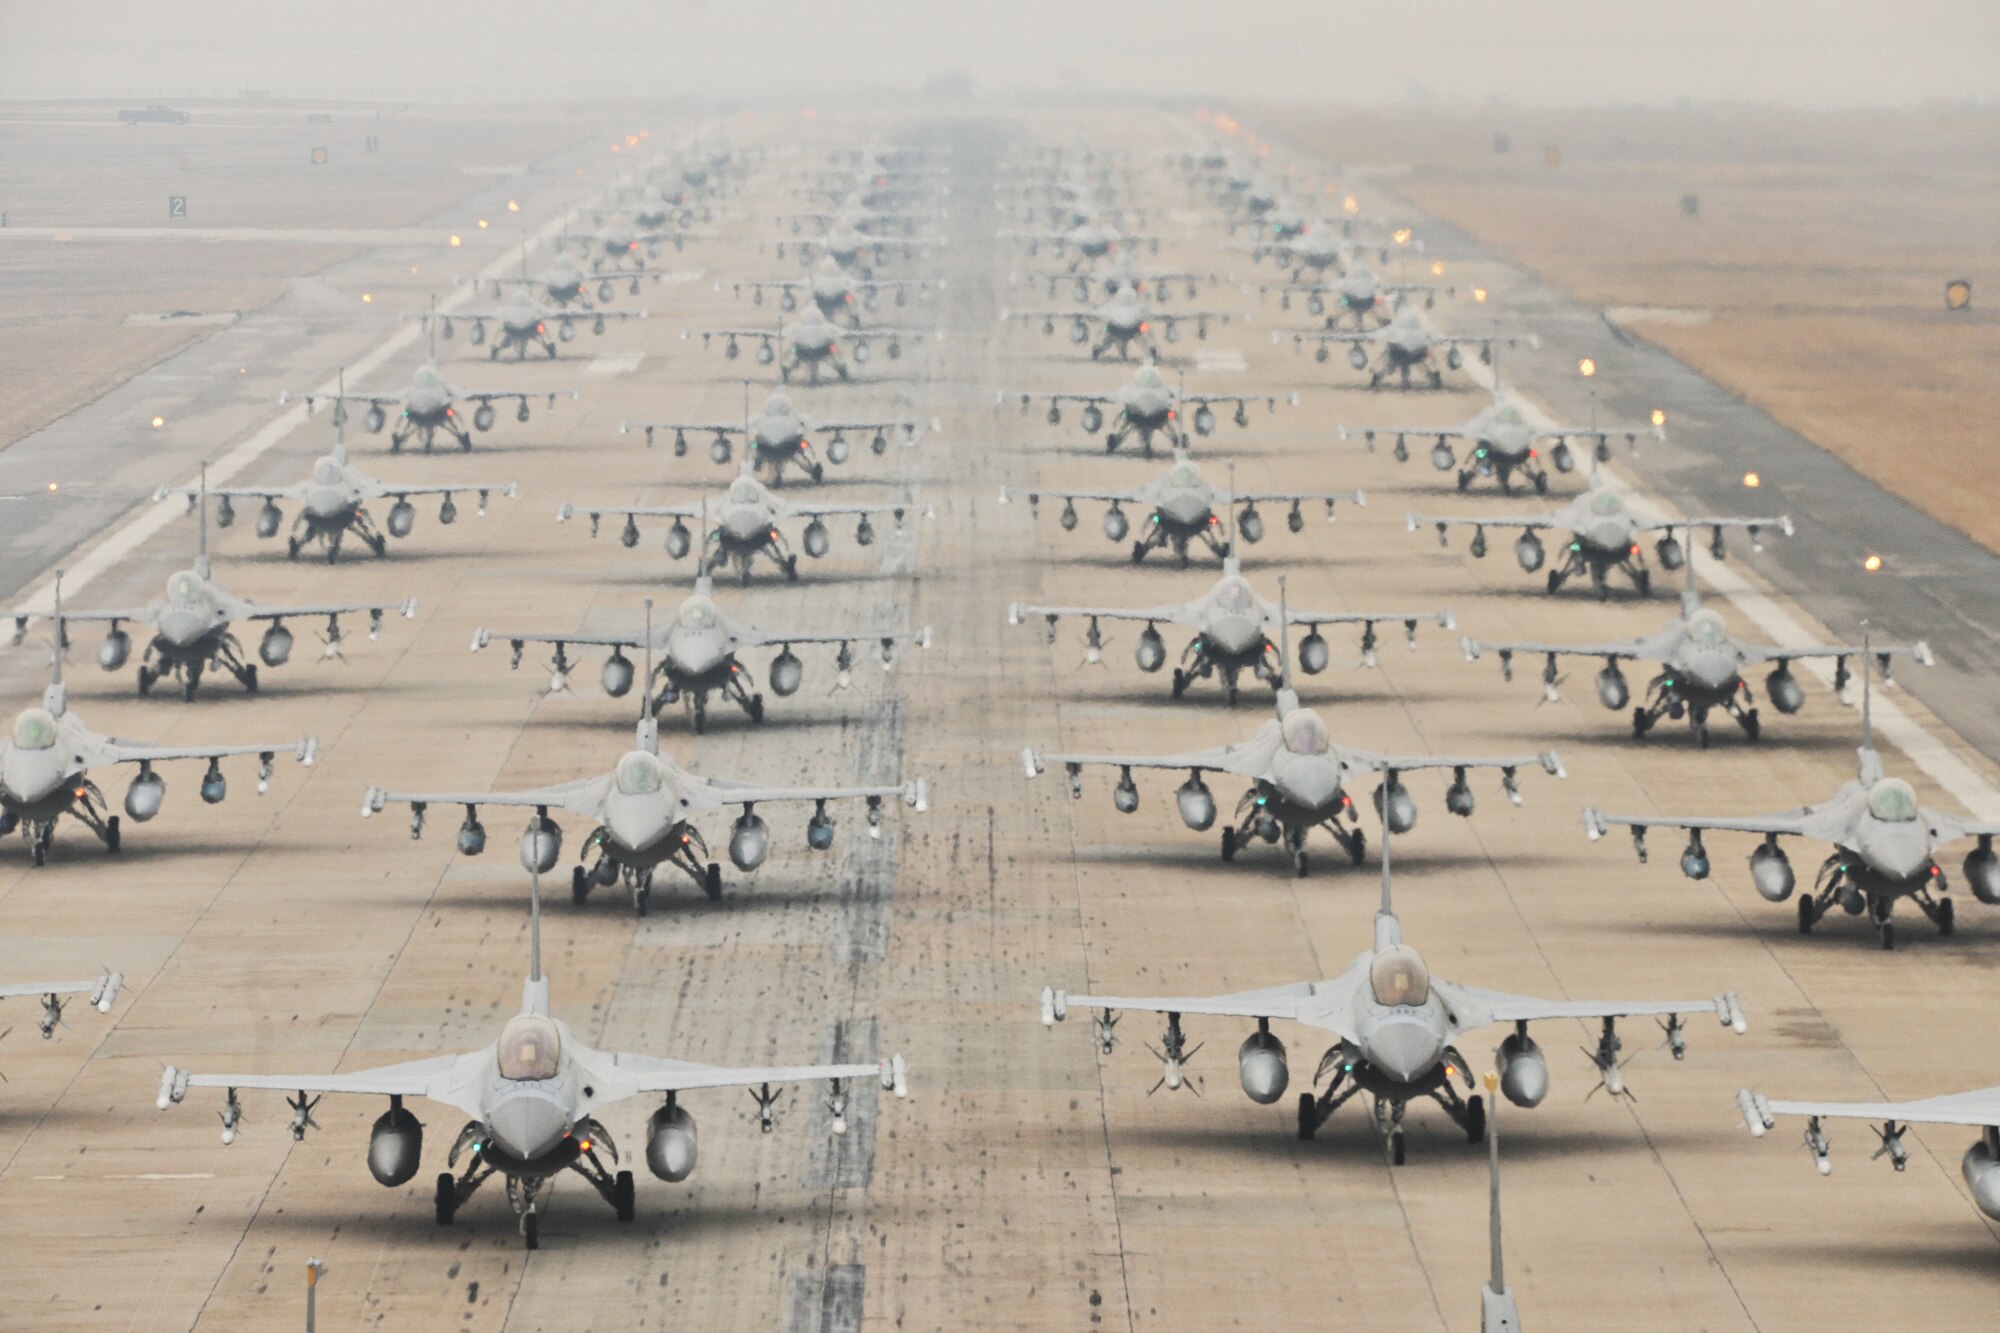 F-16 Fighting Falcons from the 35th and 80th Fighter Squadrons of the 8th Fighter Wing, Kunsan Air Base, Republic of Korea; the 421st Expeditionary Fighter Squadron of the 388th FW at Hill Air Force Base, Utah; the 55th EFS from the 20th FW at Shaw AFB, S.C.; and from the 38th Fighter Group of the ROK Air Force, demonstrate an “Elephant Walk” as they taxi down a runway during an exercise at Kunsan Air Base, Republic of Korea, March 2, 2012. The exercise showcased Kunsan AB aircrews' capability to quickly and safely prepare an aircraft for a wartime mission. (U.S. Air Force photo by Senior Airman Brittany Y. Auld/Released)